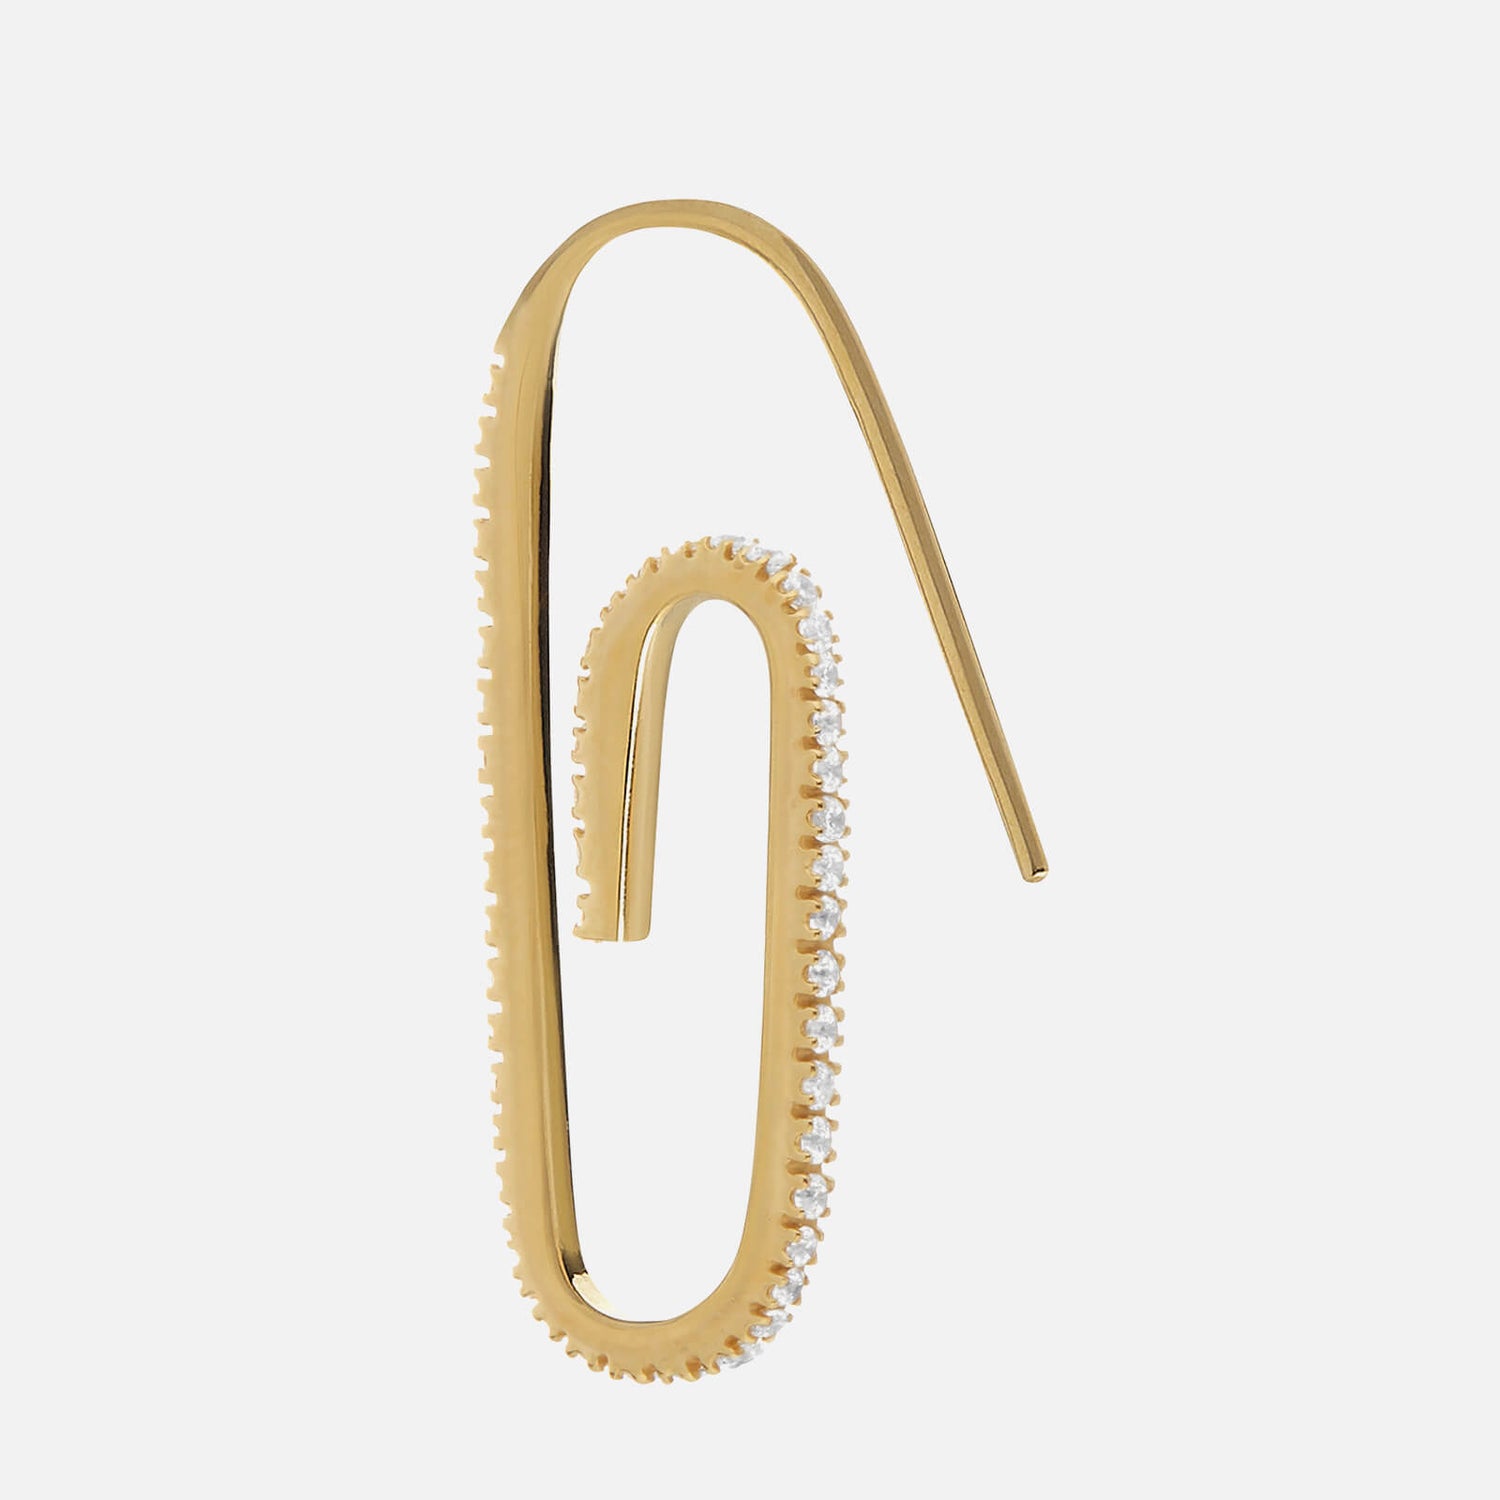 Hillier Bartley Women's Classic Pave Paperclip Earring - Gold/White